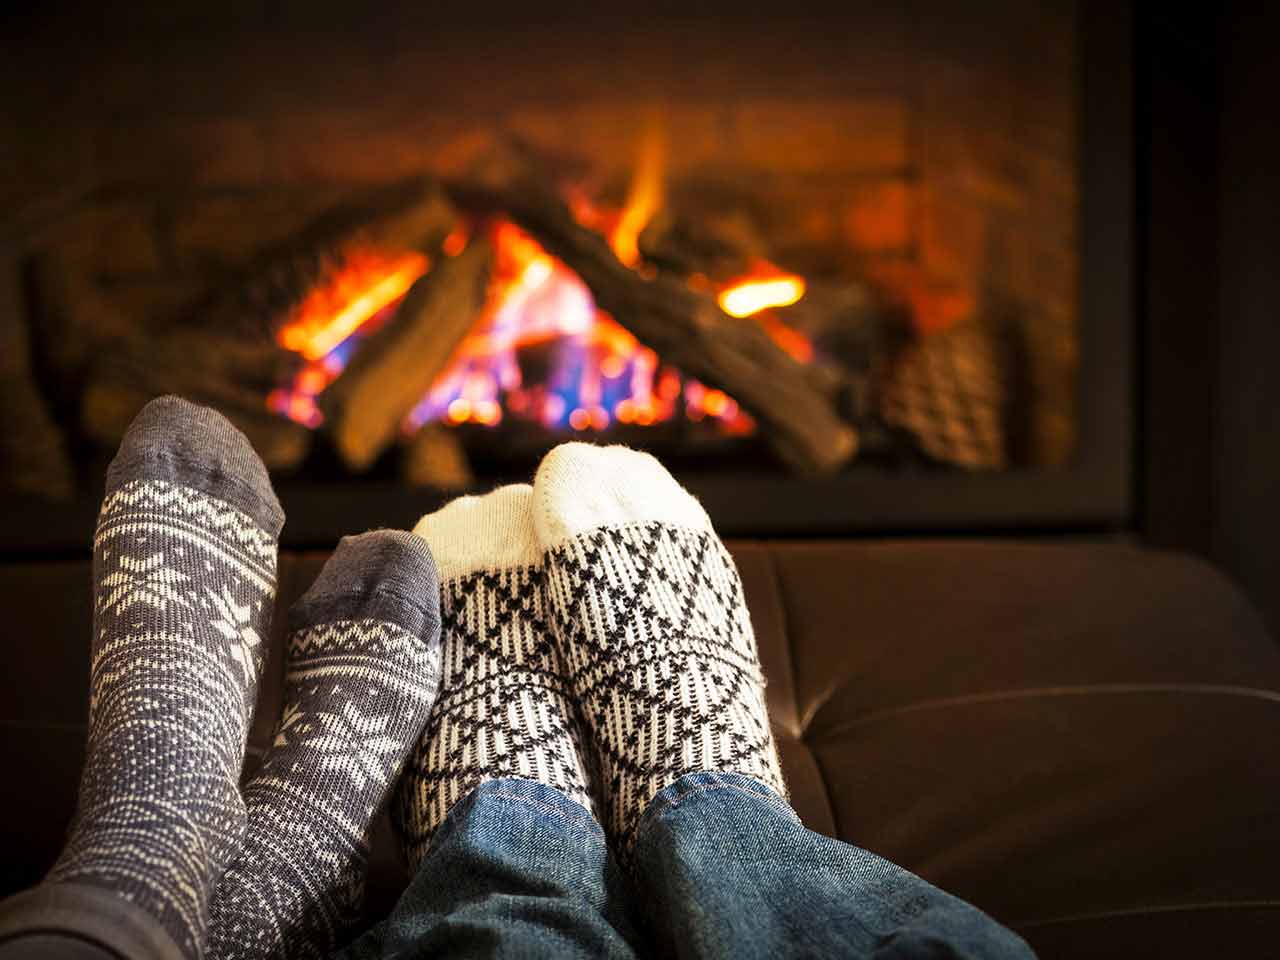 Couple's feet in socks in front of fire to represent the Winter Fuel Payment - a retirement benefit